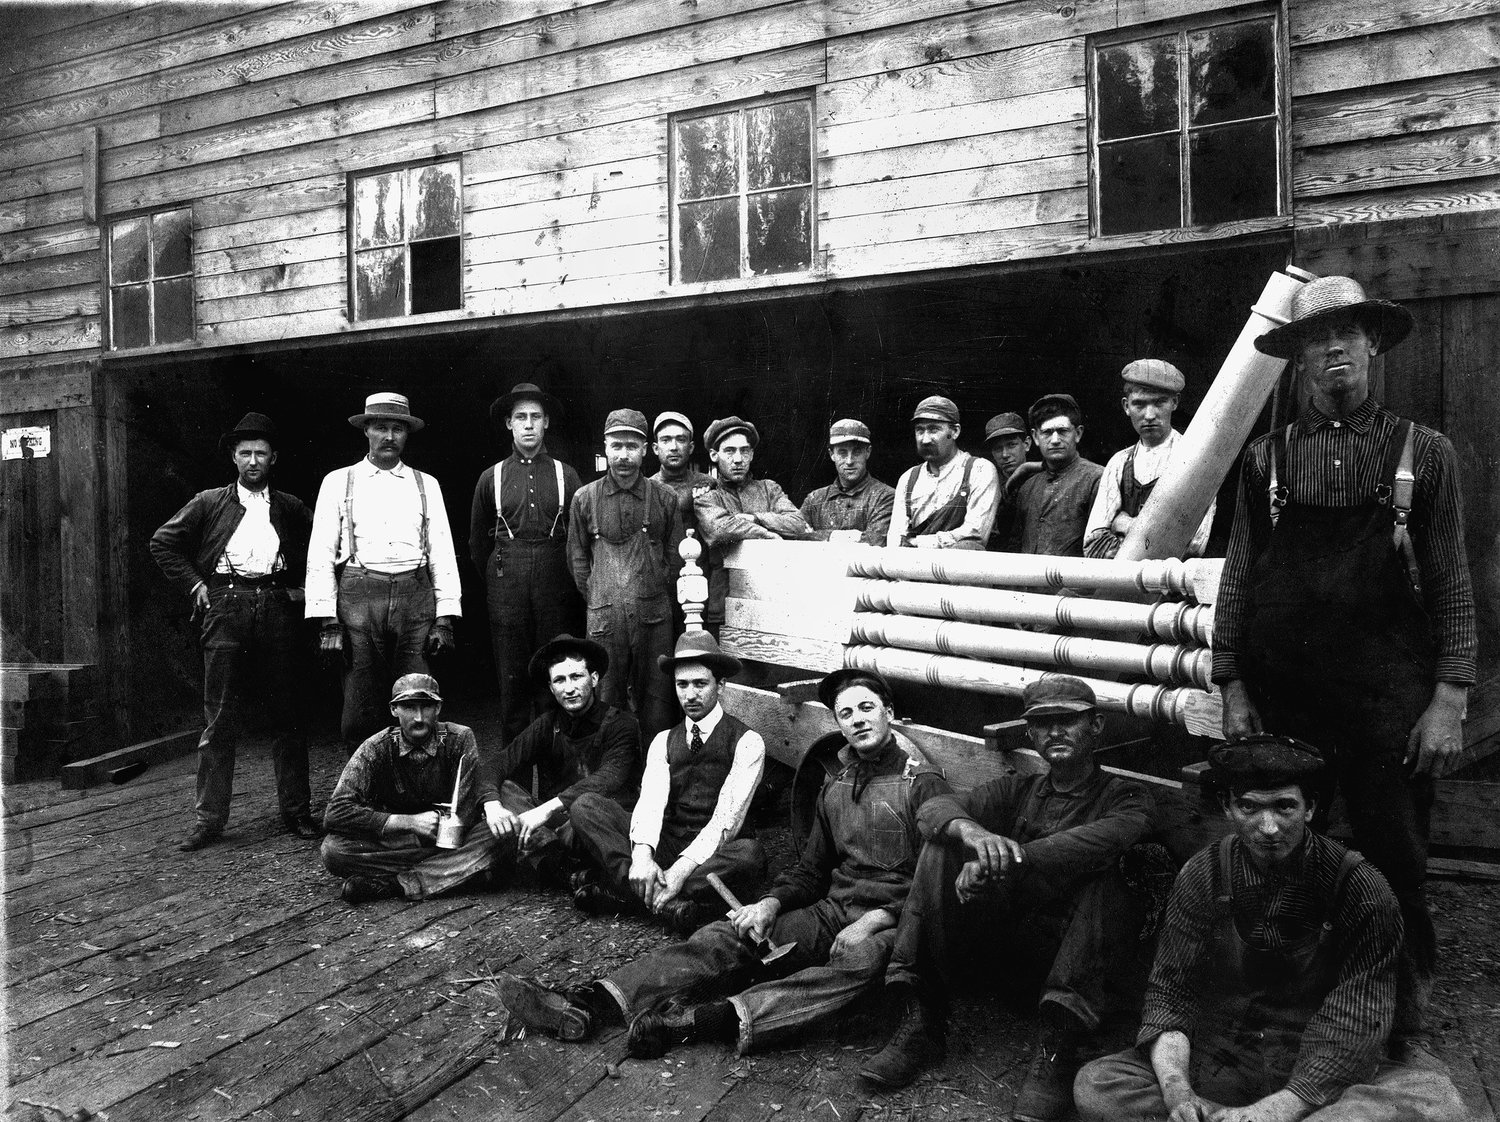 Luther Mulford is pictured in 1920 at work at a mill that made decorative columns in Chehalis. Mulford is fourth from the left in the back row and is the grandfather of Jim Nunn (photo contributor) whose mother Irma is one of seven children of Luther and Mary Canterbury Mulford of Chehalis. This photo and information was originally submitted by Jim Nunn for The Chronicle’s Our Hometowns books.